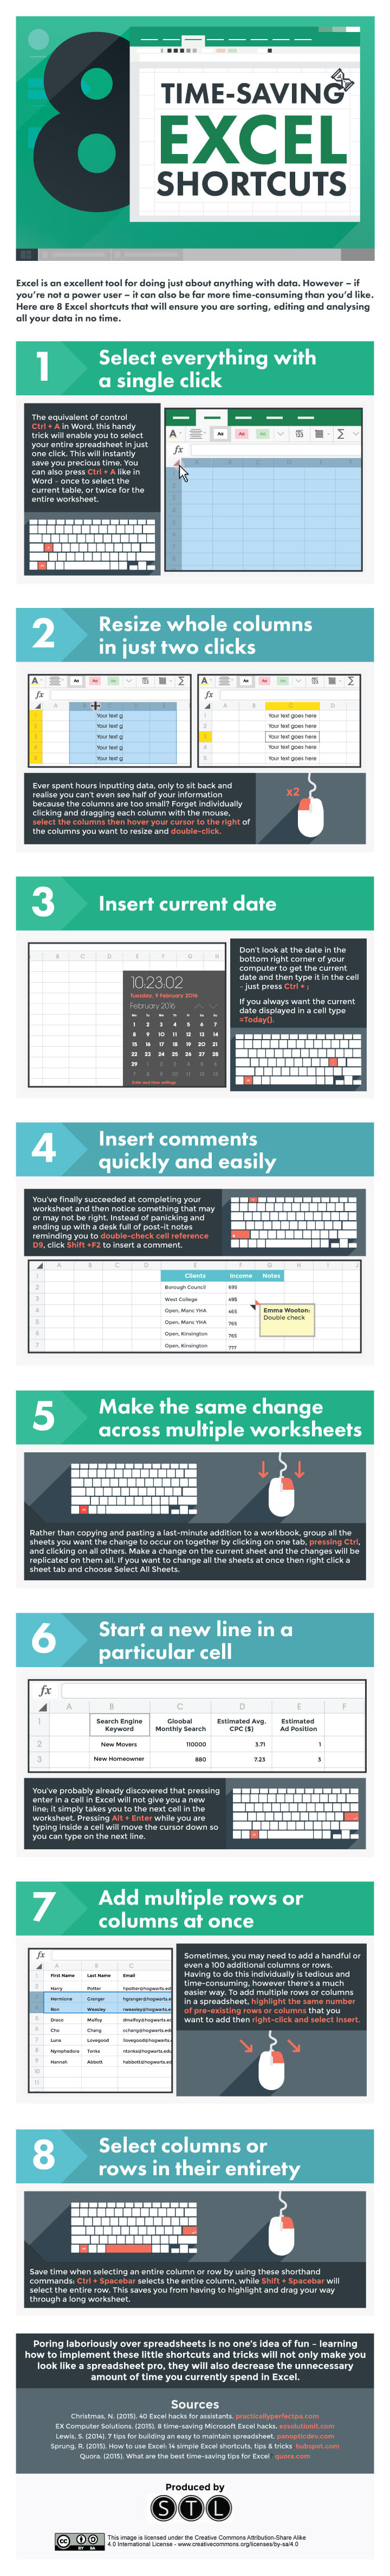 8 time-saving shortcuts for Excel